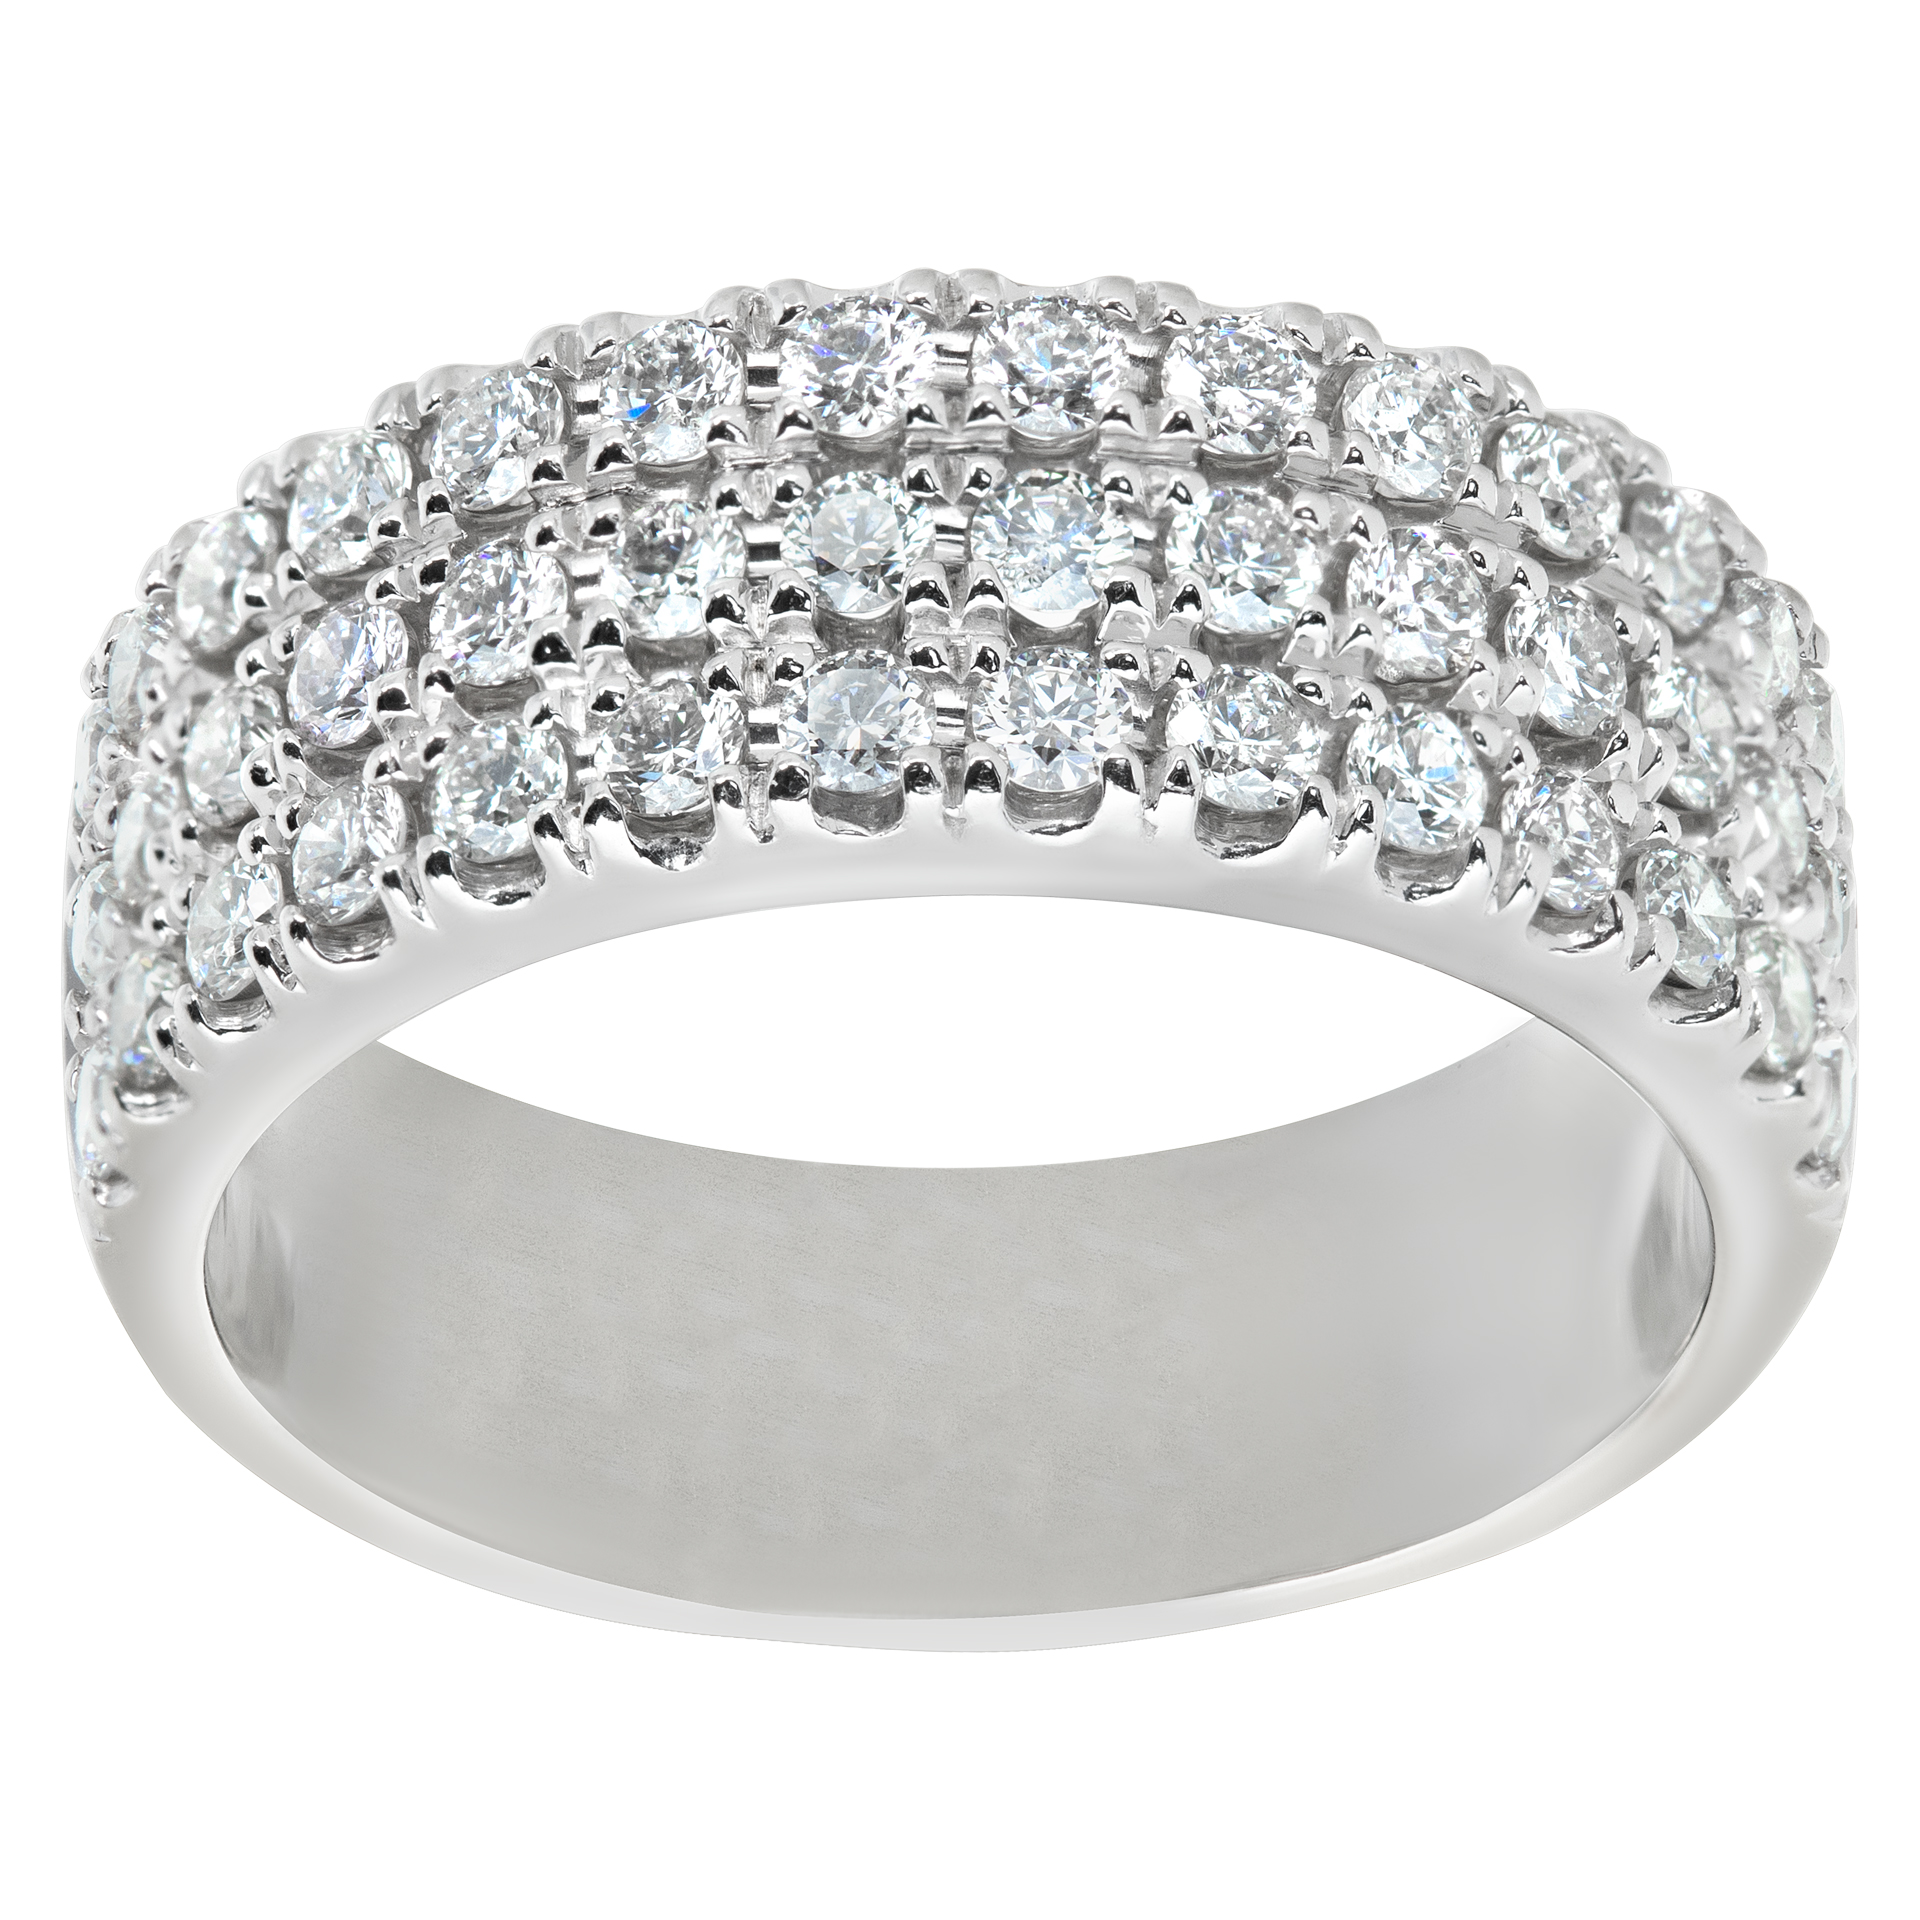 Triple row pave set Effy diamond ring with approx 0.60 cts in diamonds in 14k white gold